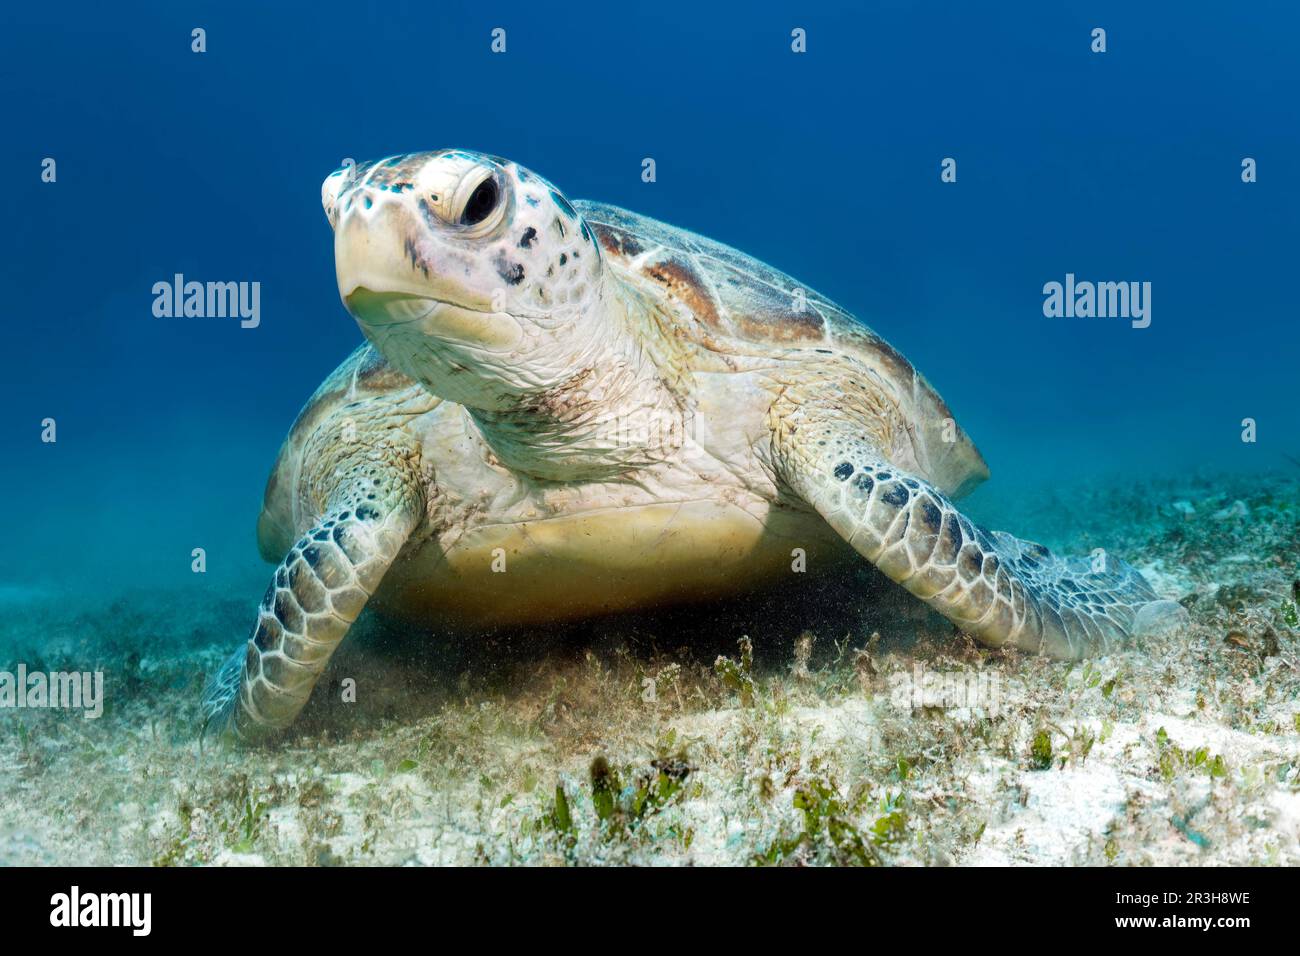 Green turtle (Chelonia mydas) from front, seagrass meadow, Sulu Sea, Pacific Ocean, Palawan, Calamian Islands, Philippines Stock Photo